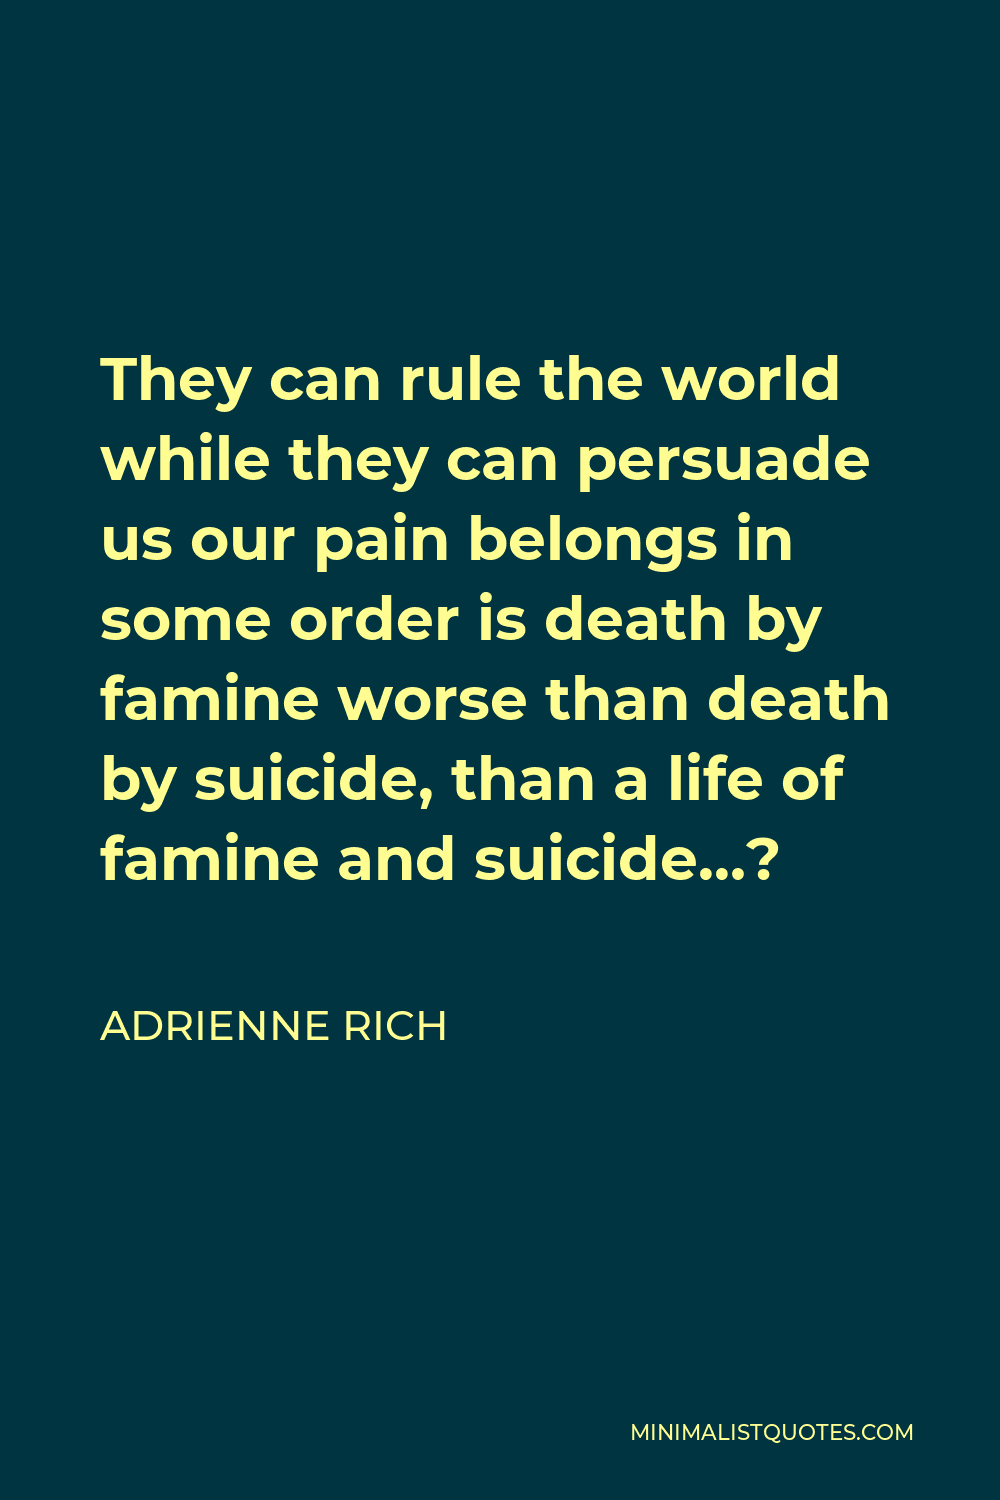 Adrienne Rich Quote - They can rule the world while they can persuade us our pain belongs in some order is death by famine worse than death by suicide, than a life of famine and suicide…?